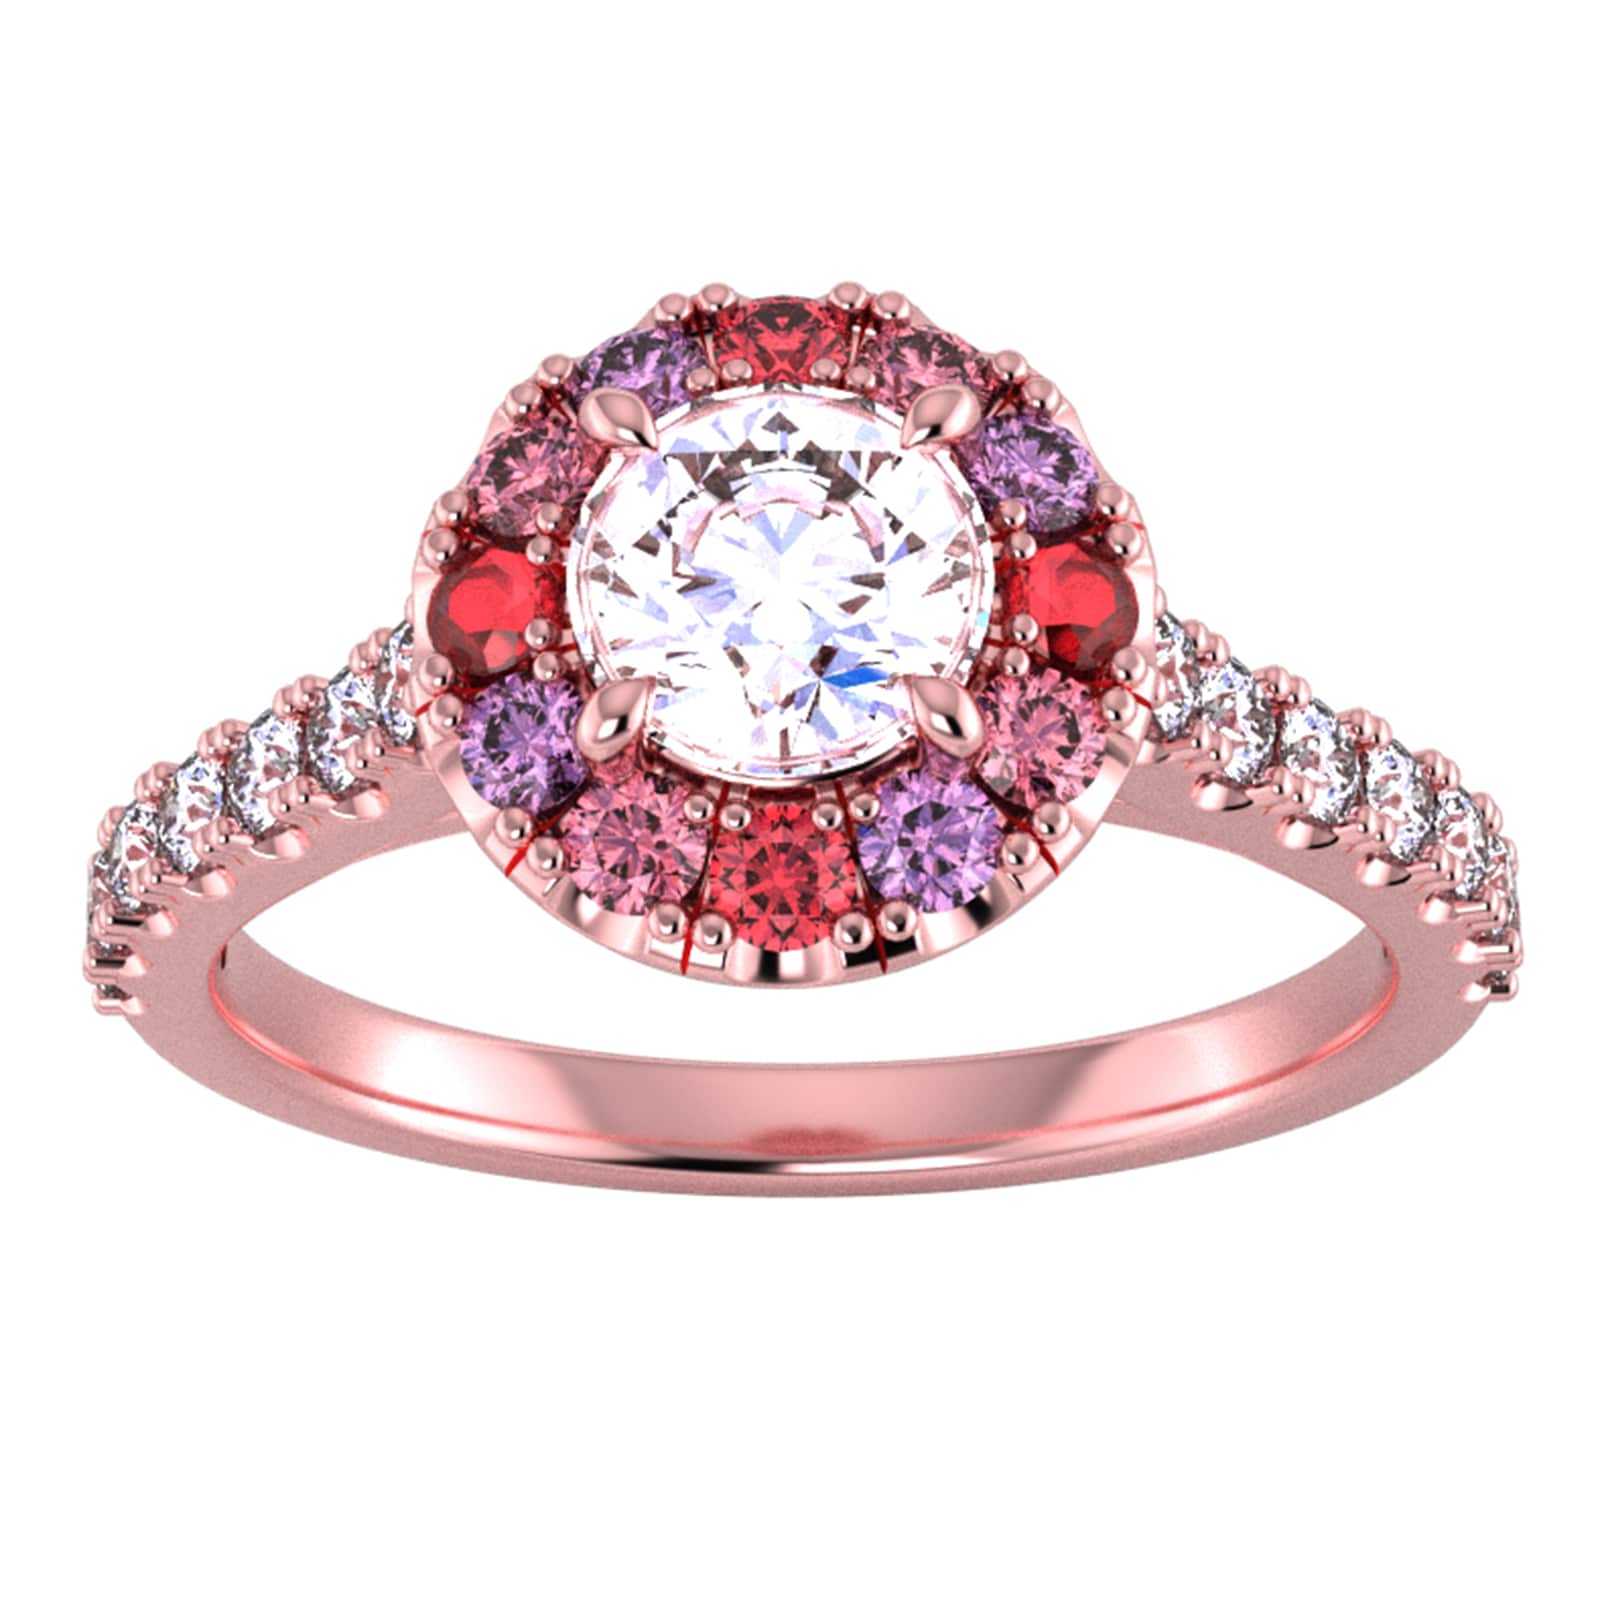 18ct Rose Gold Diamond & Pink, Red, Purple Sapphire Halo Ring - Ring Size I.5